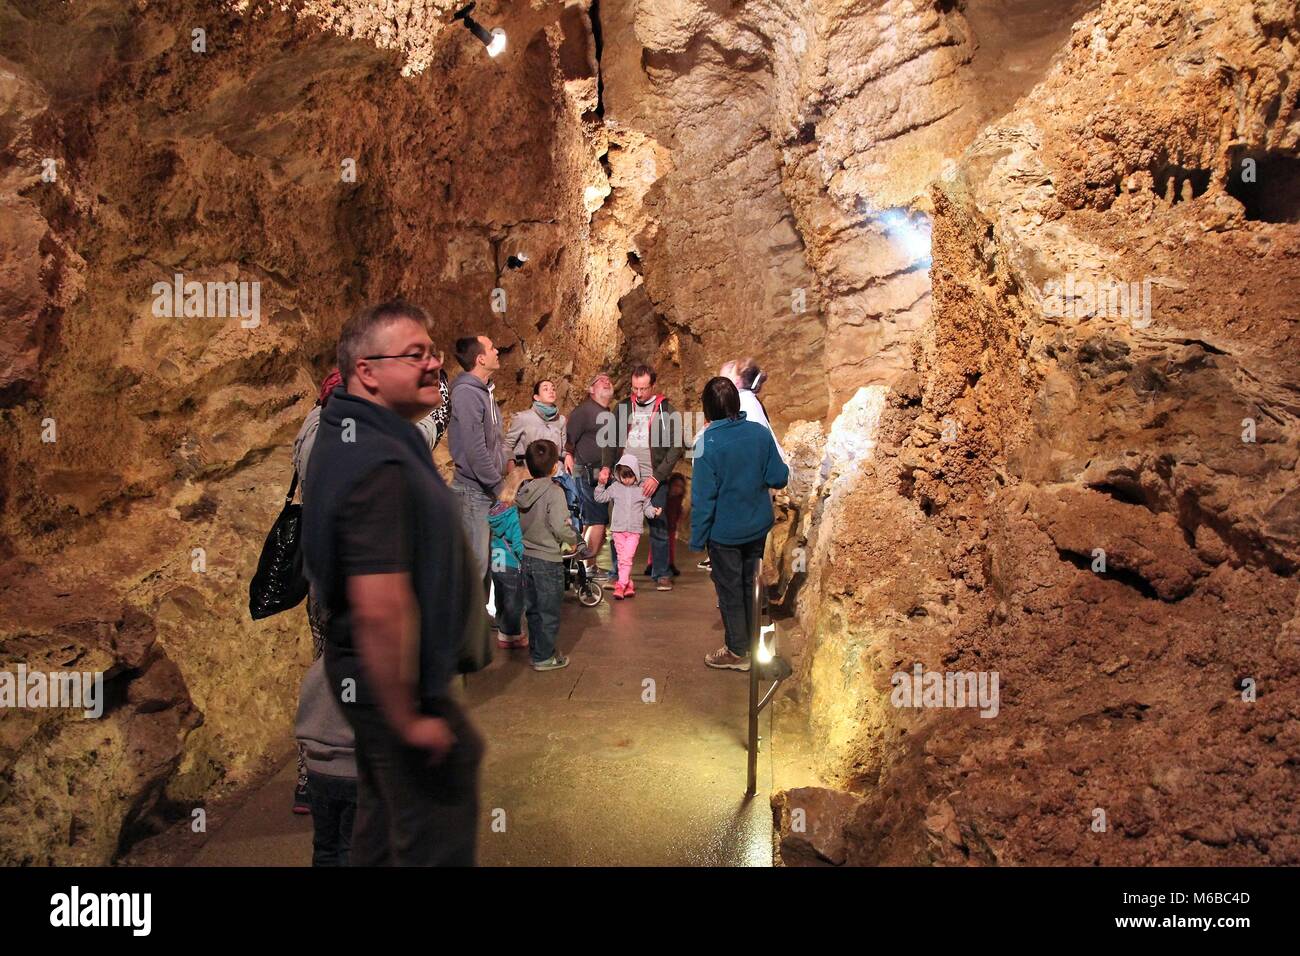 BUDAPEST, HUNGARY - JUNE 21, 2014: People visit Palvolgyi Cave in Budapest. Budapest has the largest thermal water cave system in the world. Stock Photo